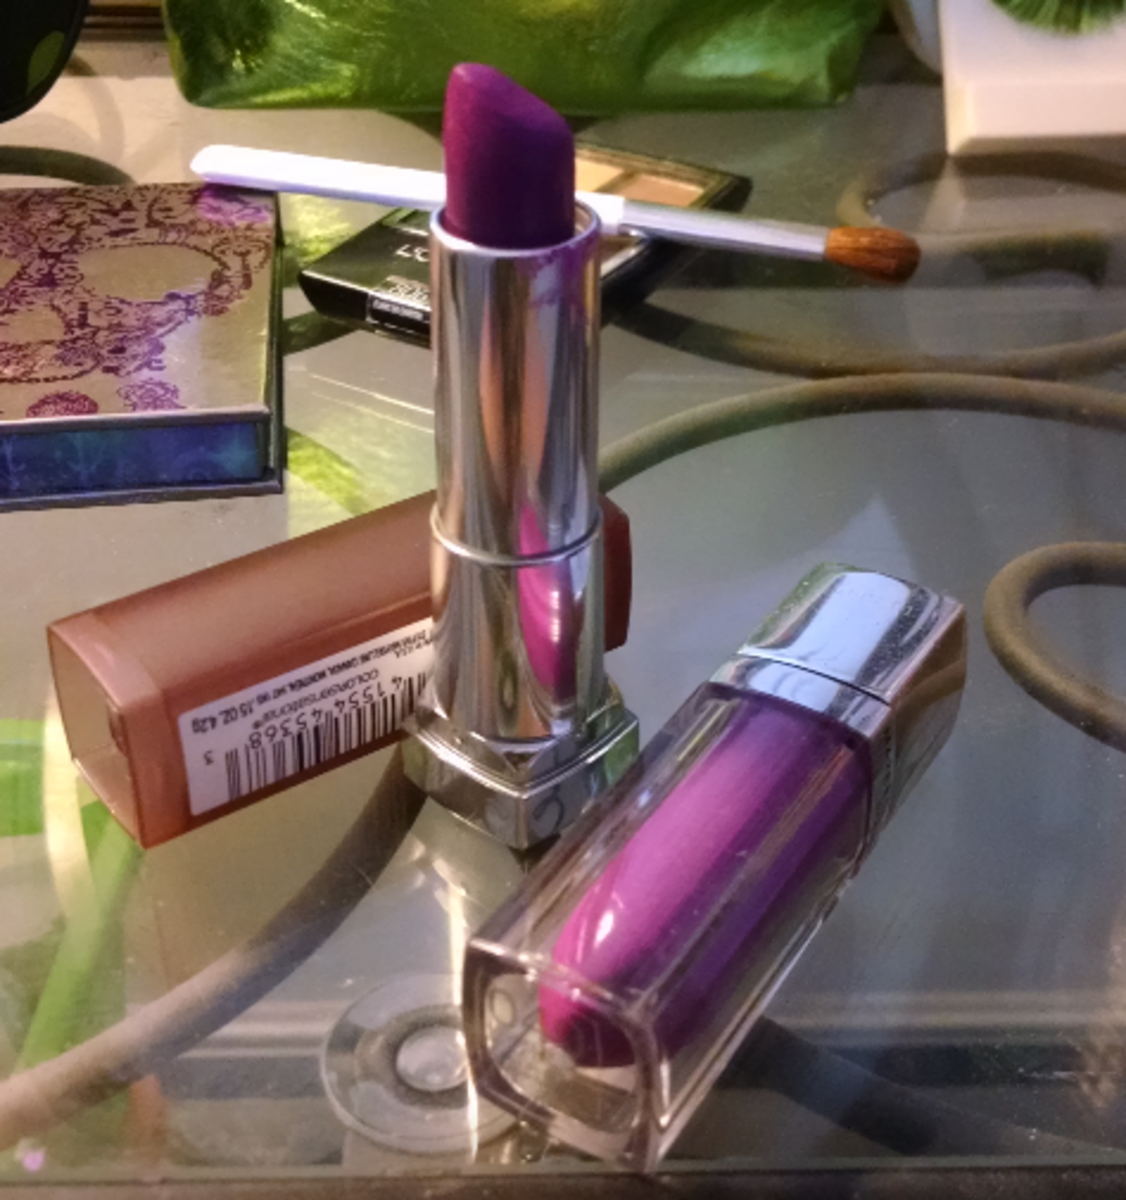 Maybelline Brings the Bright Purple Lipstick Trend to the Drugstore